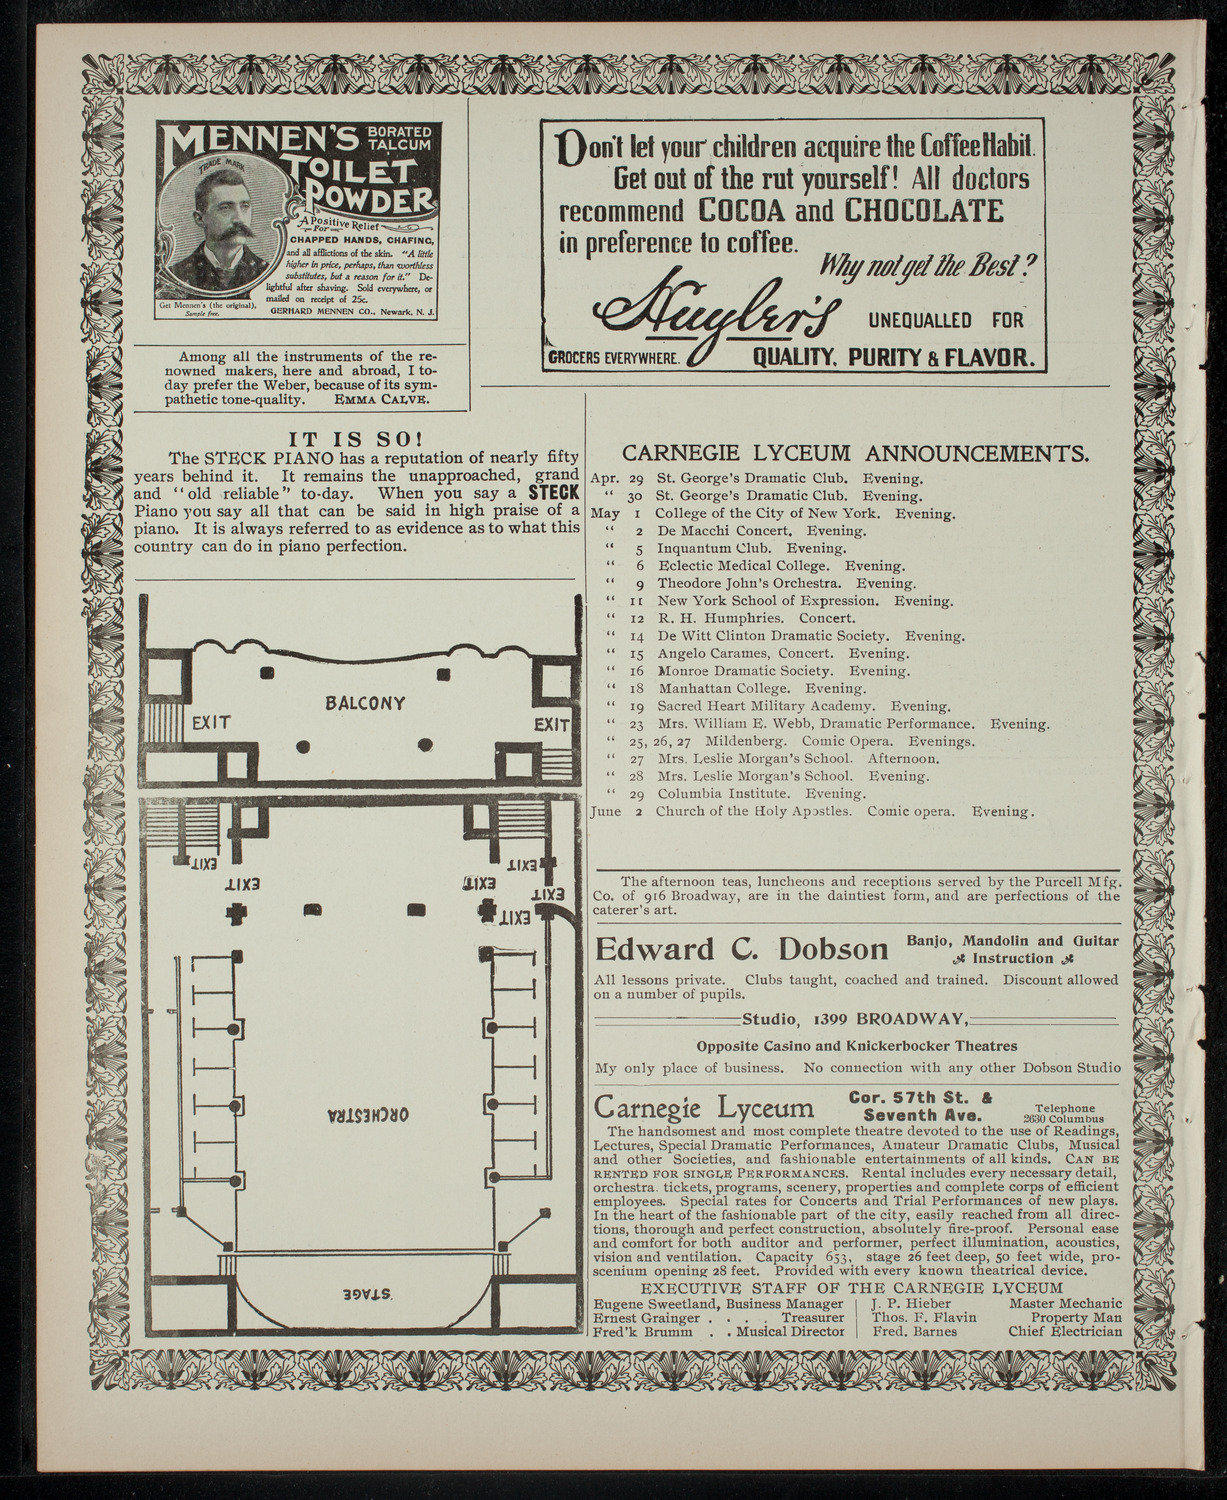 American Academy of Dramatic Arts, April 28, 1903, program page 4